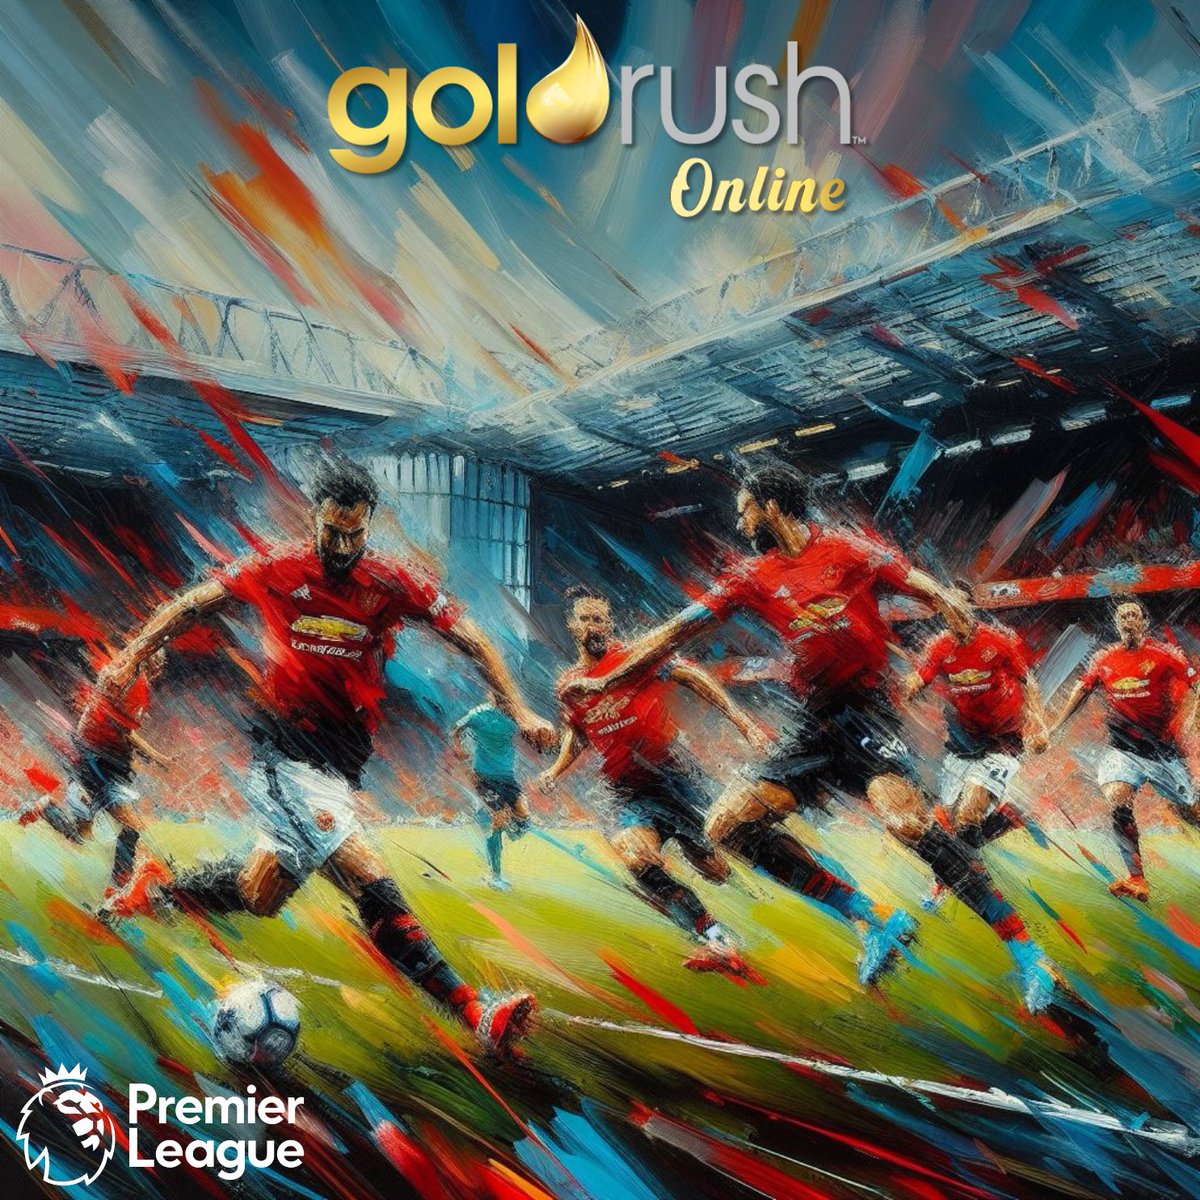 Matchweek 34 promises drama, excitement, and unforgettable moments.

As the season enters its final stretch, every match is a final, every goal could be decisive. 

Feel The Rush with goldrush.co.za for what's left of this season!

#Goldrush #FeelTheRush #PremierLeague